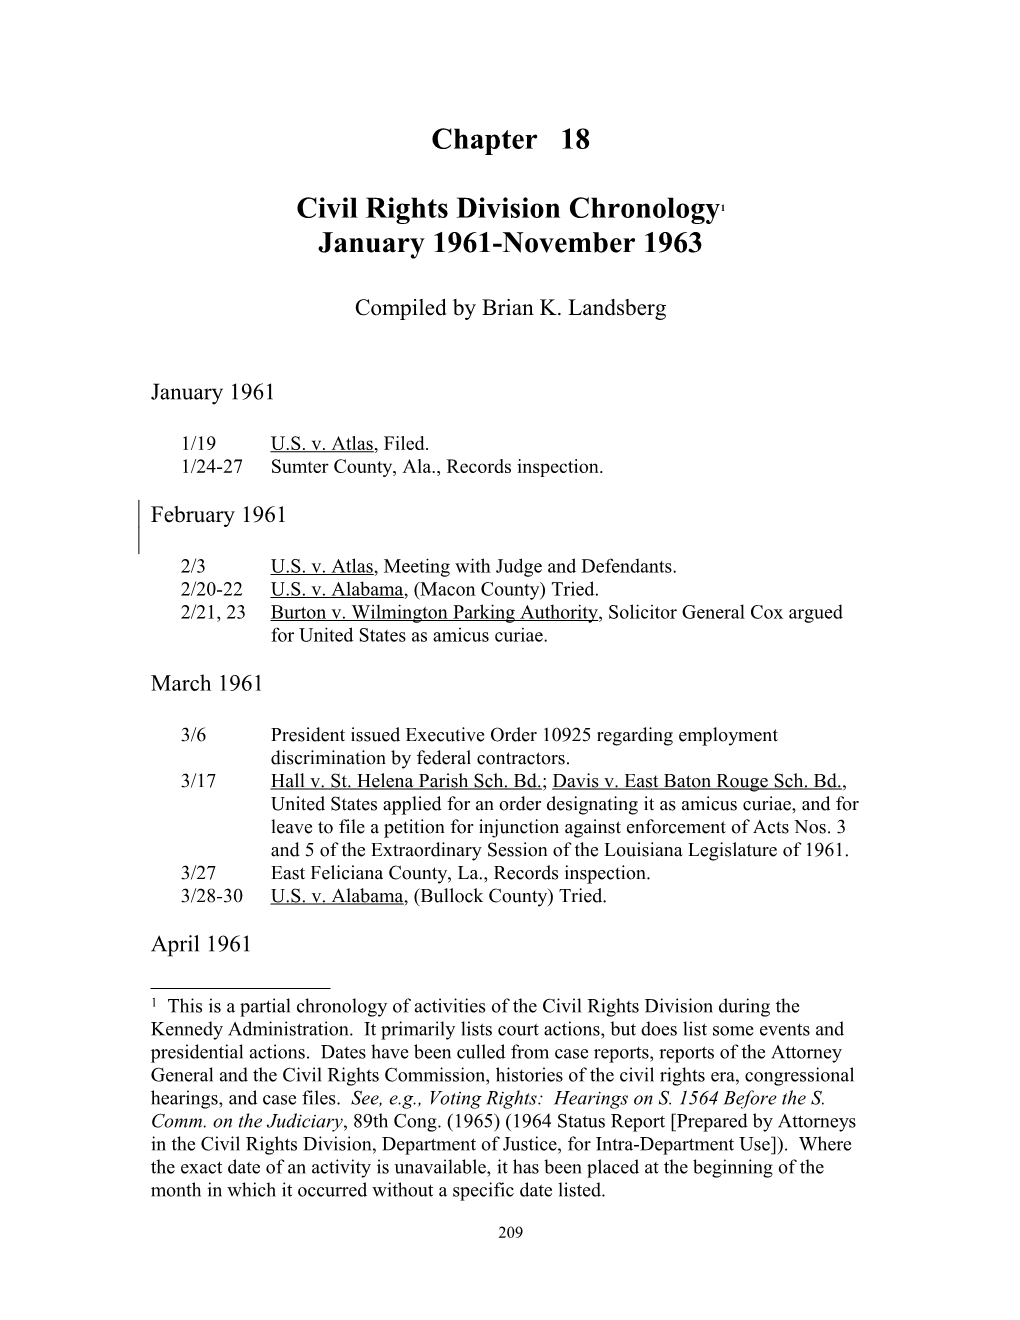 Civil Rights Division Chronology